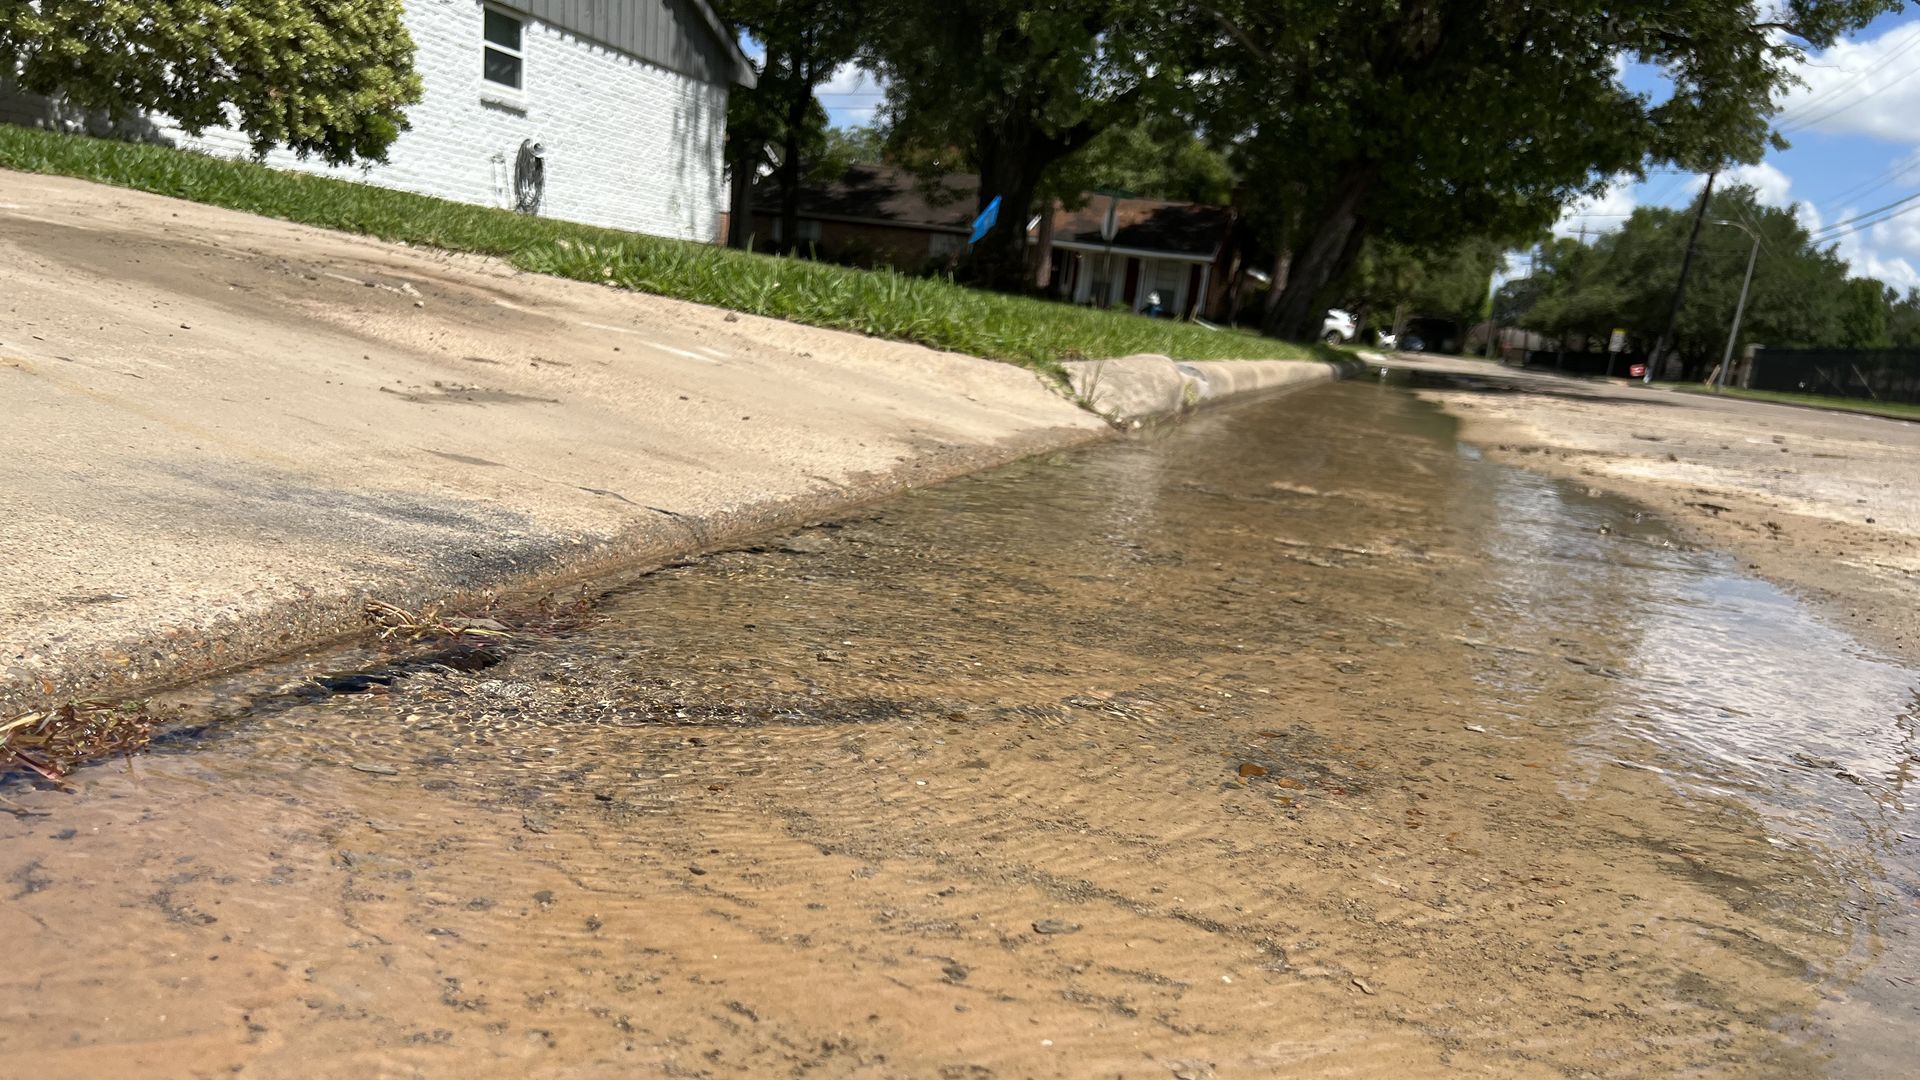 Close-up of water leaking from a broken underground water pipe in a residential Houston neighborhood on a sunny day